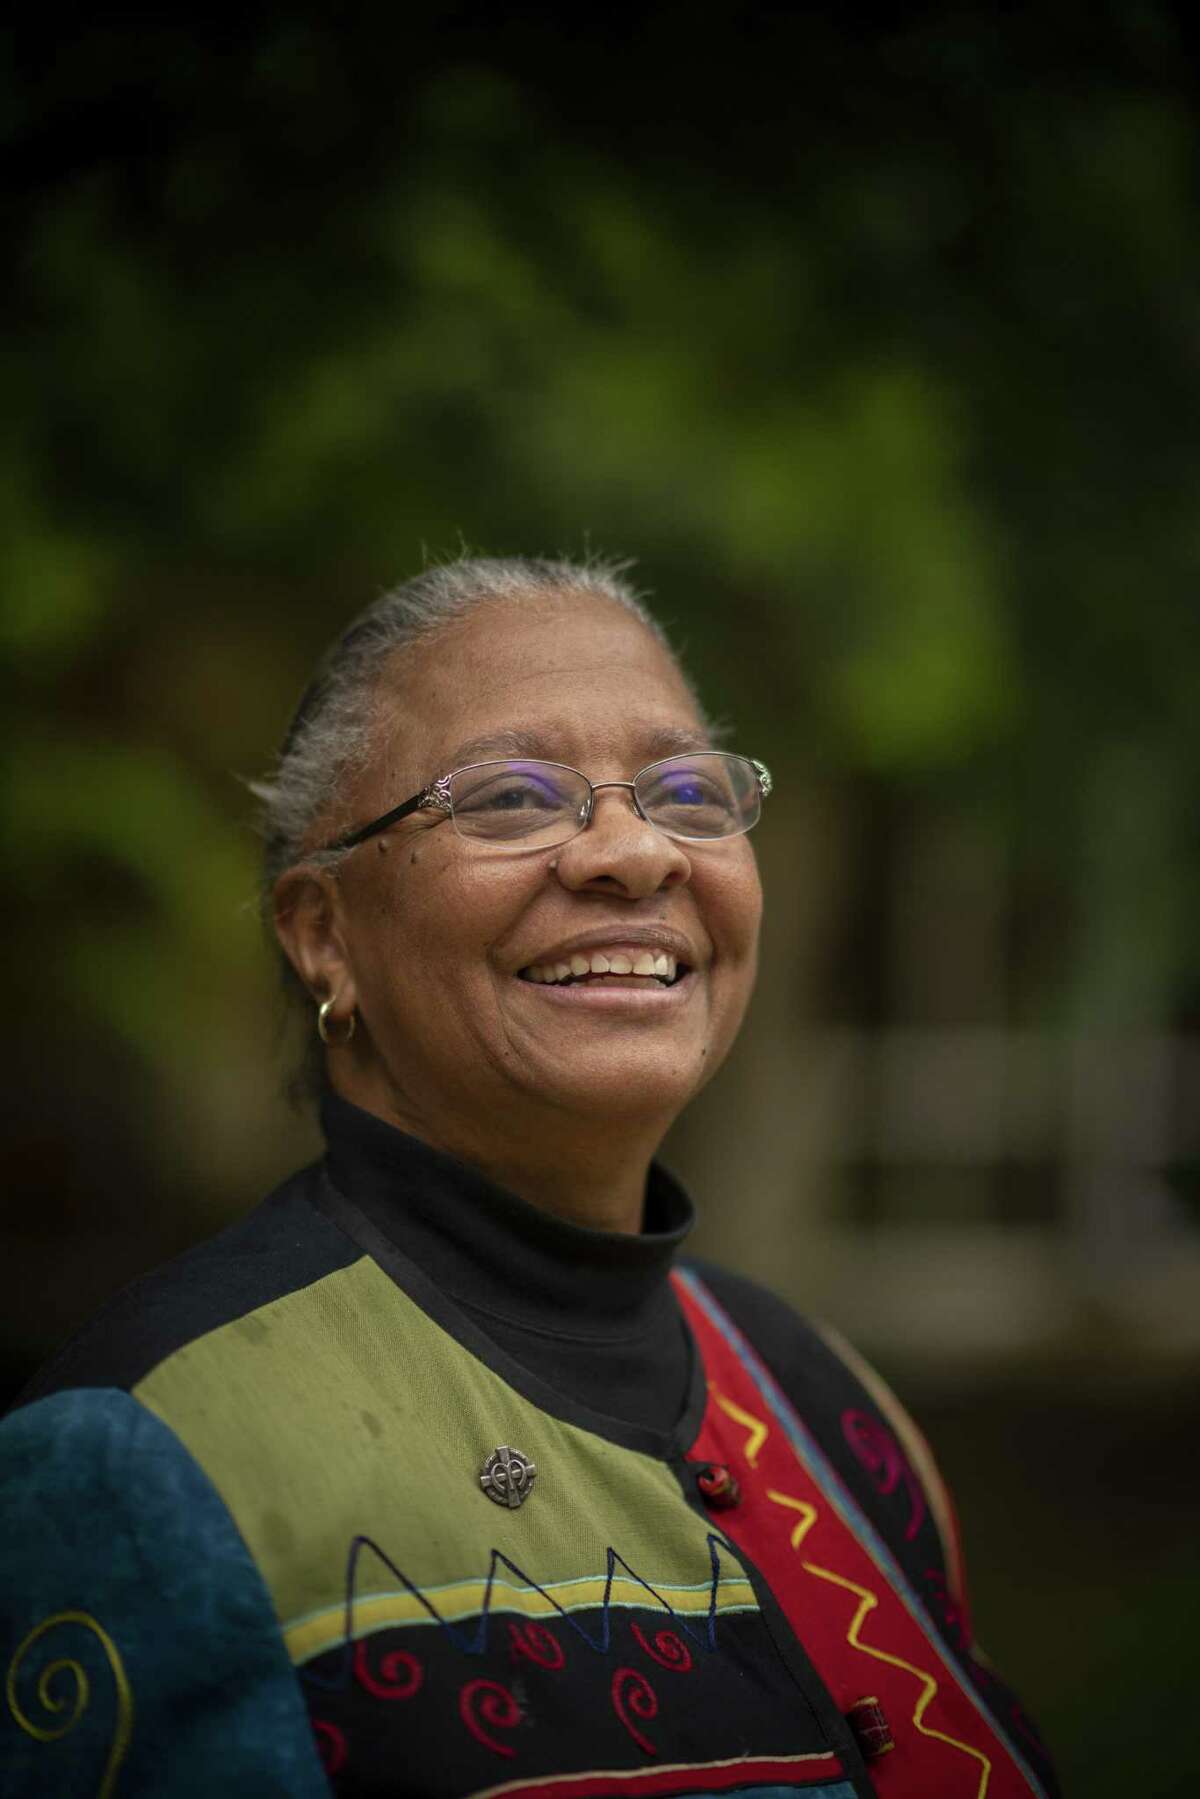 Sister Addie Walker is a Catholic nun runs the Sankofa Insitute for African American Pastoral Leadership at the Oblate School of Theology. She said that at Oblate, Sankofa is working to change approaches to teaching biblical studies.